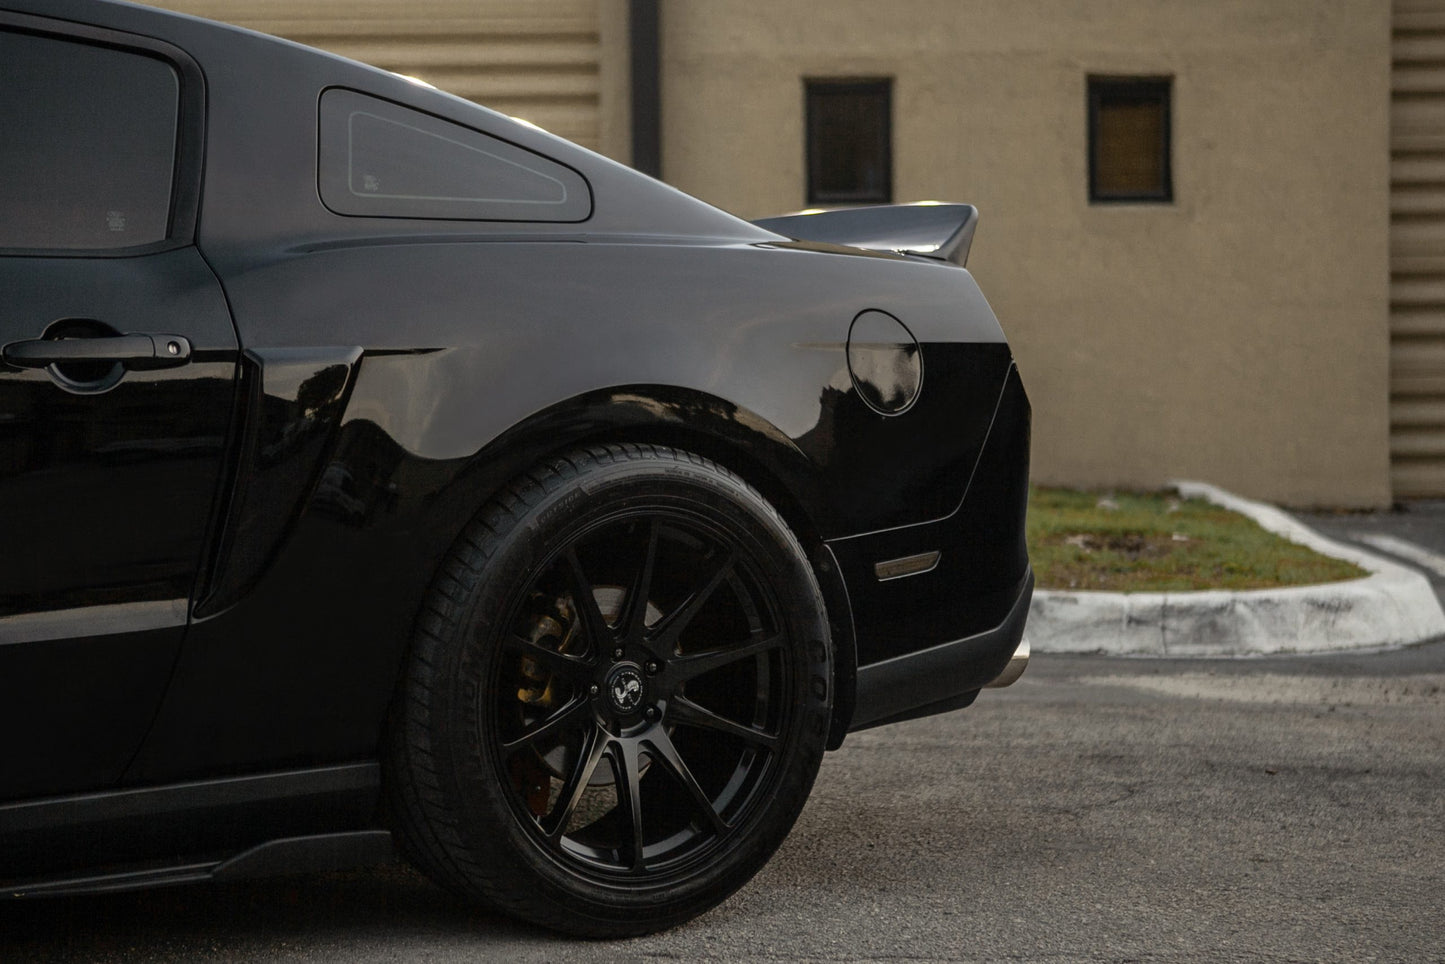 Clinched Ford Mustang S197 (2010-2014) Ducktail Spoiler